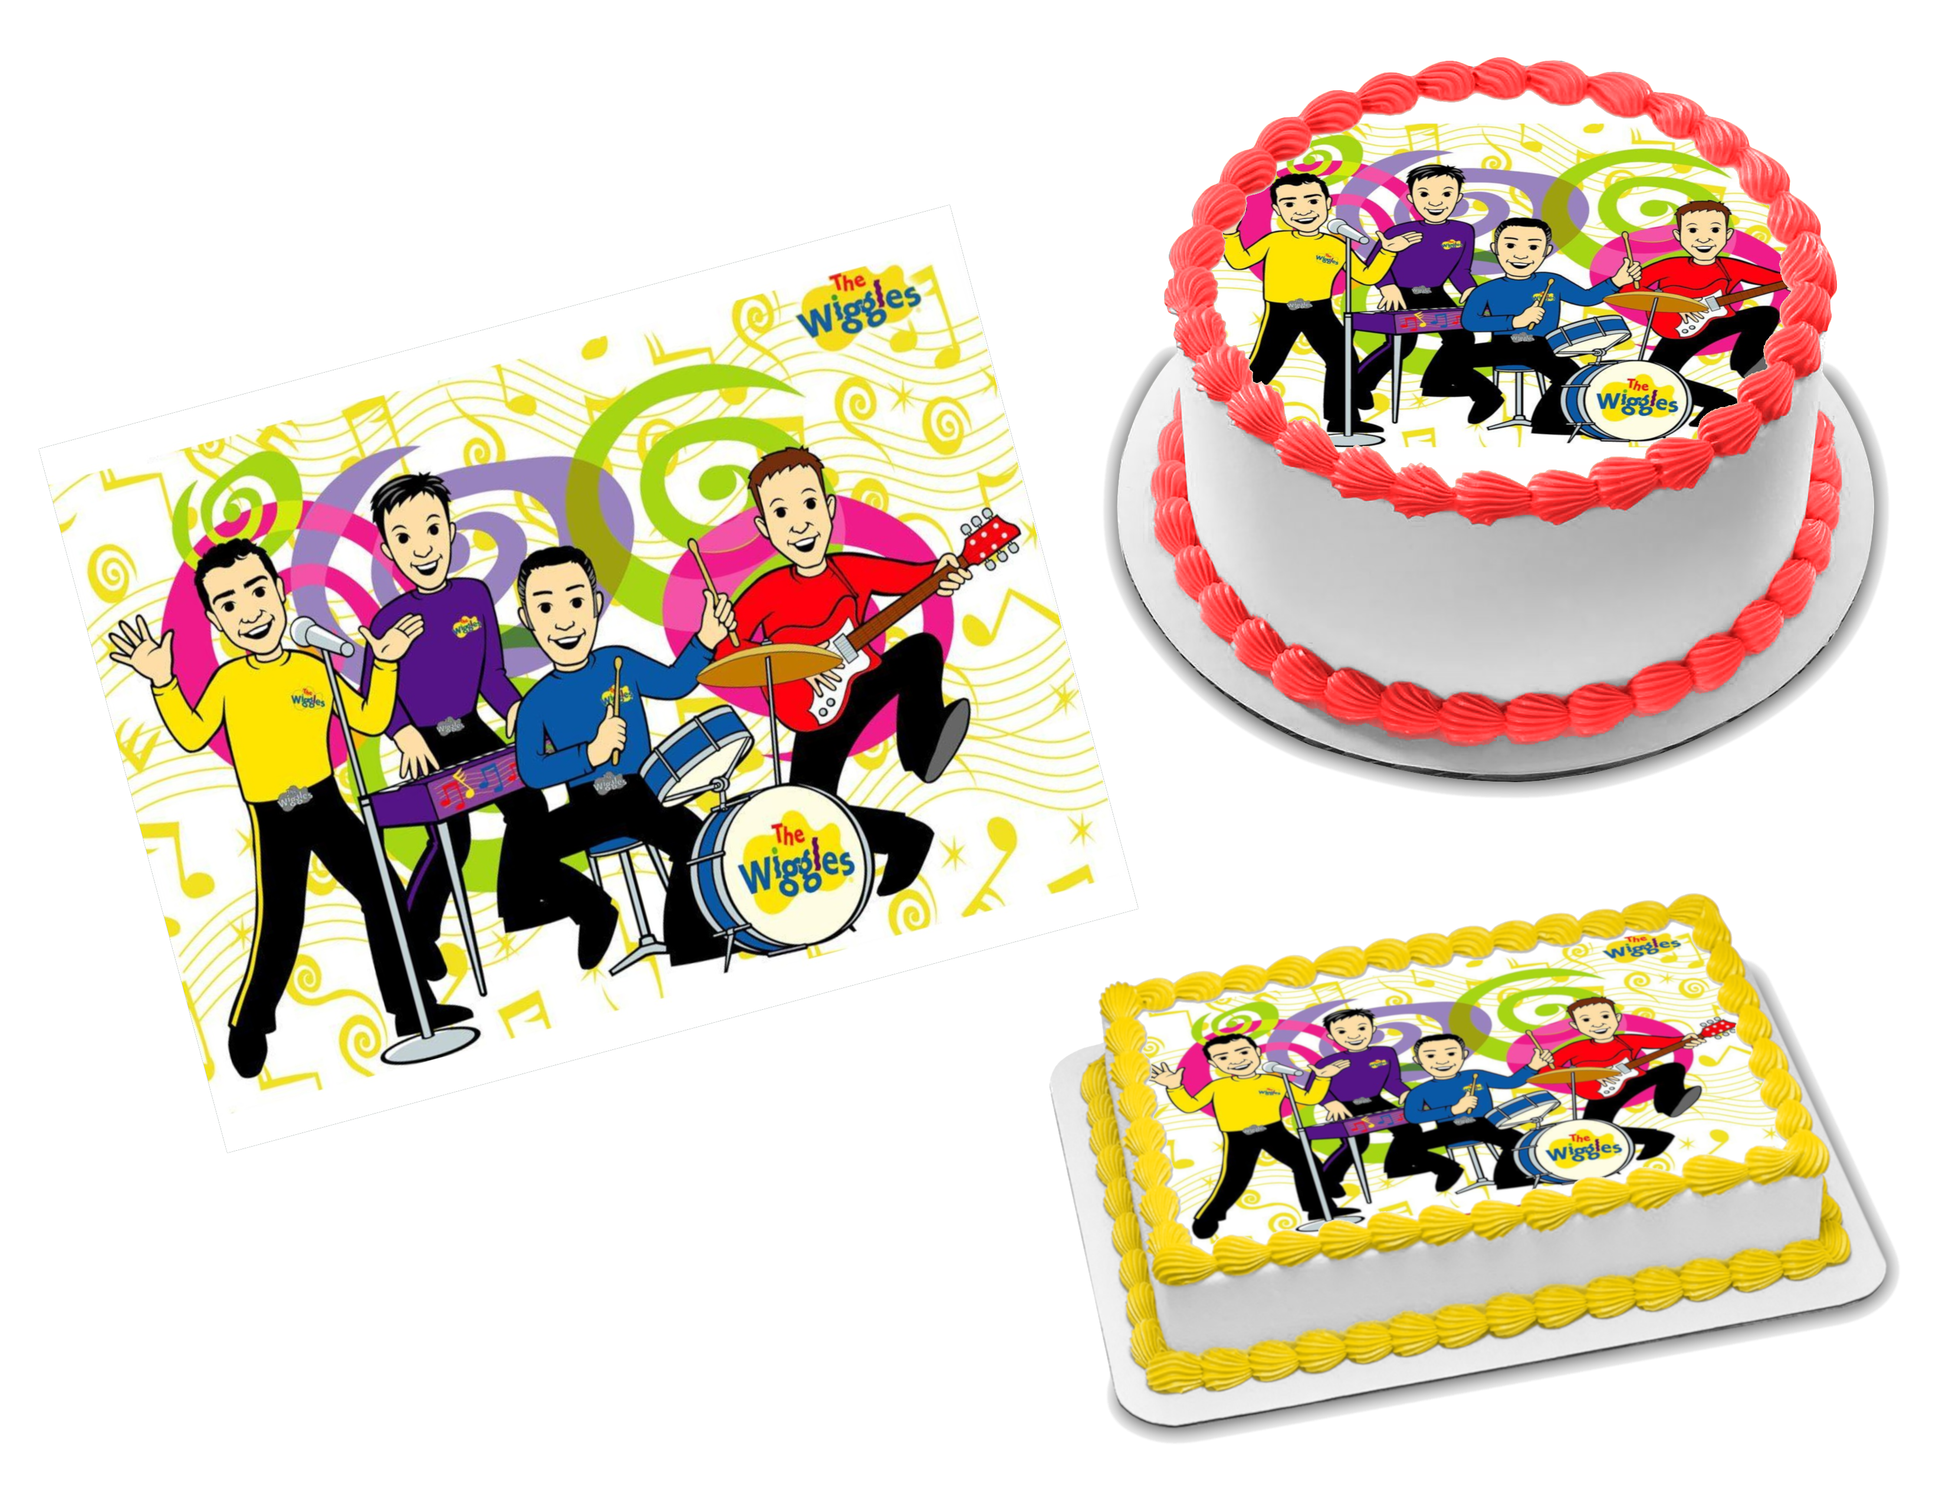 The Wiggles Edible Image Frosting Sheet #4 (70+ sizes)